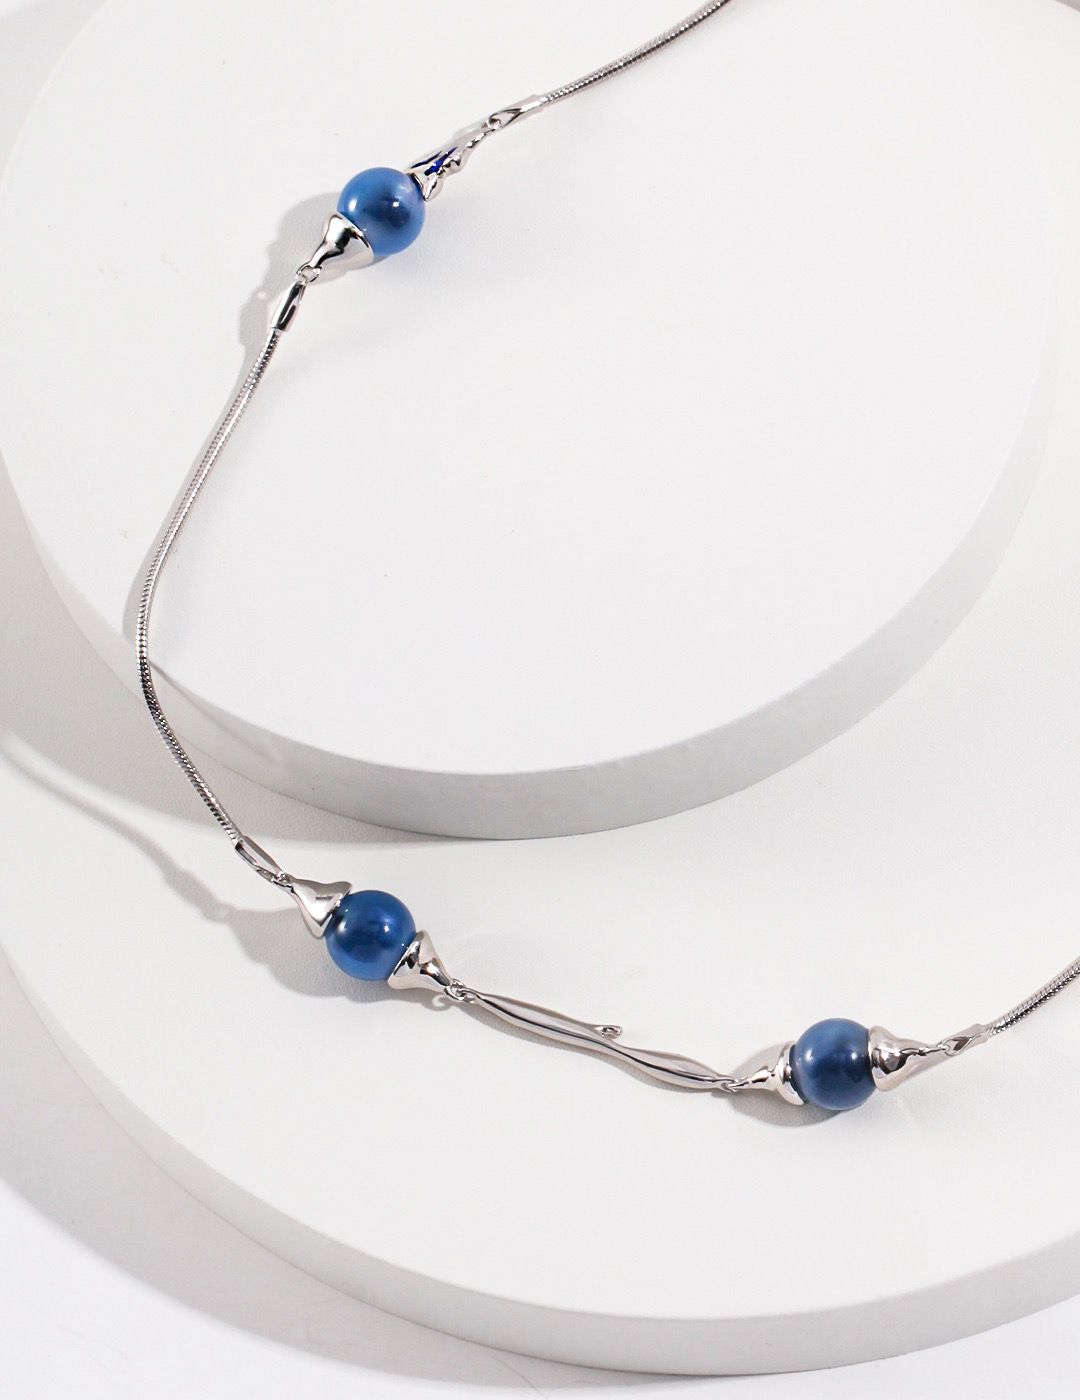 Blue agate collar necklace with silver chain